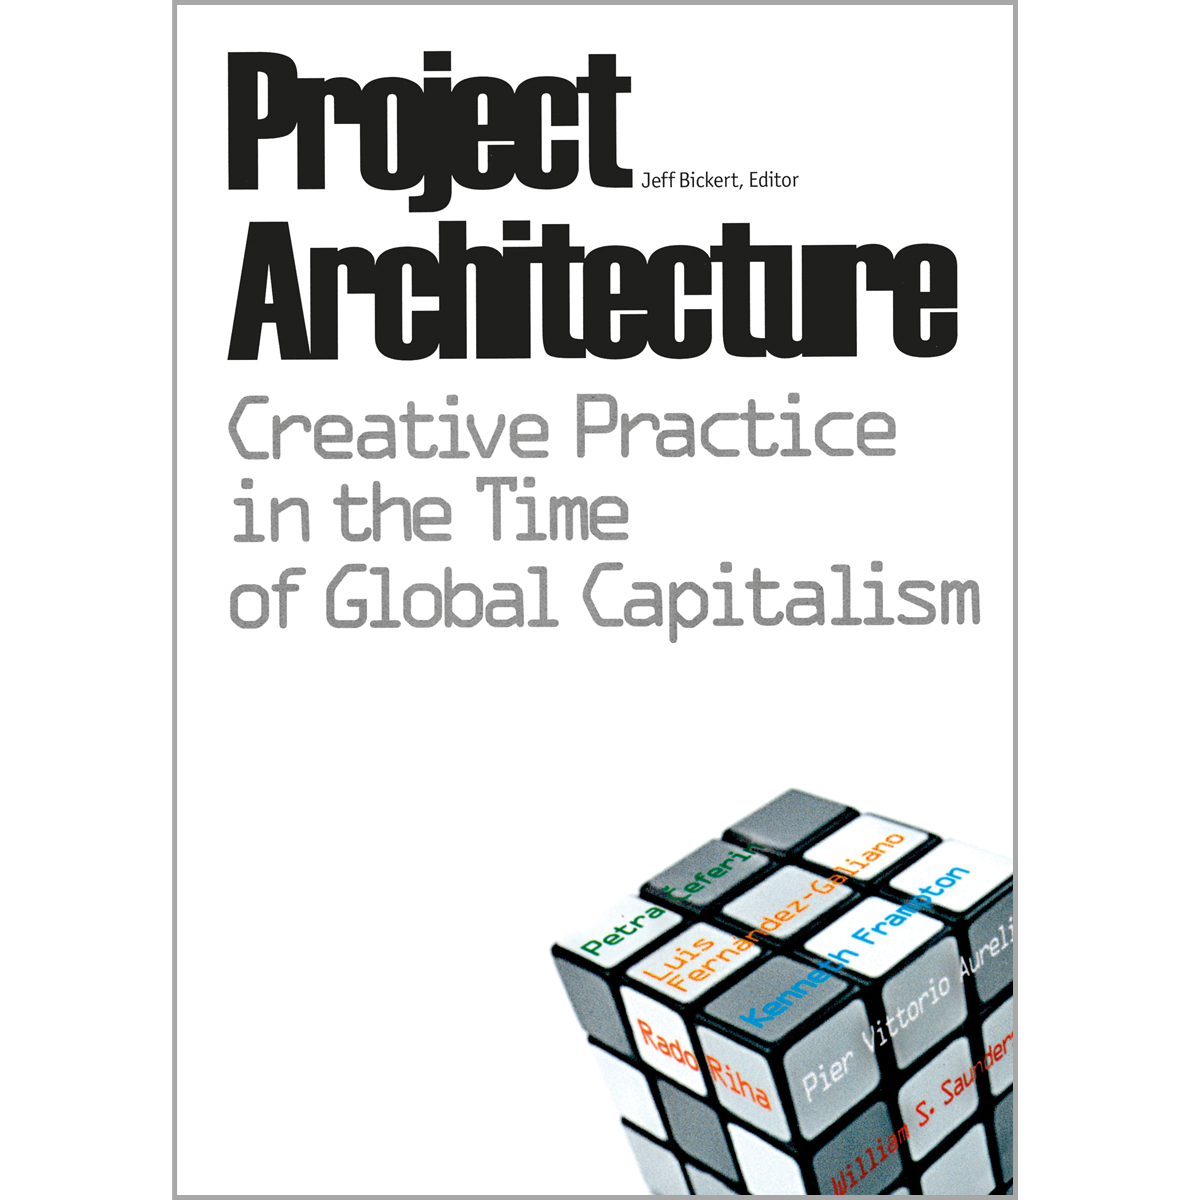 Project Architecture